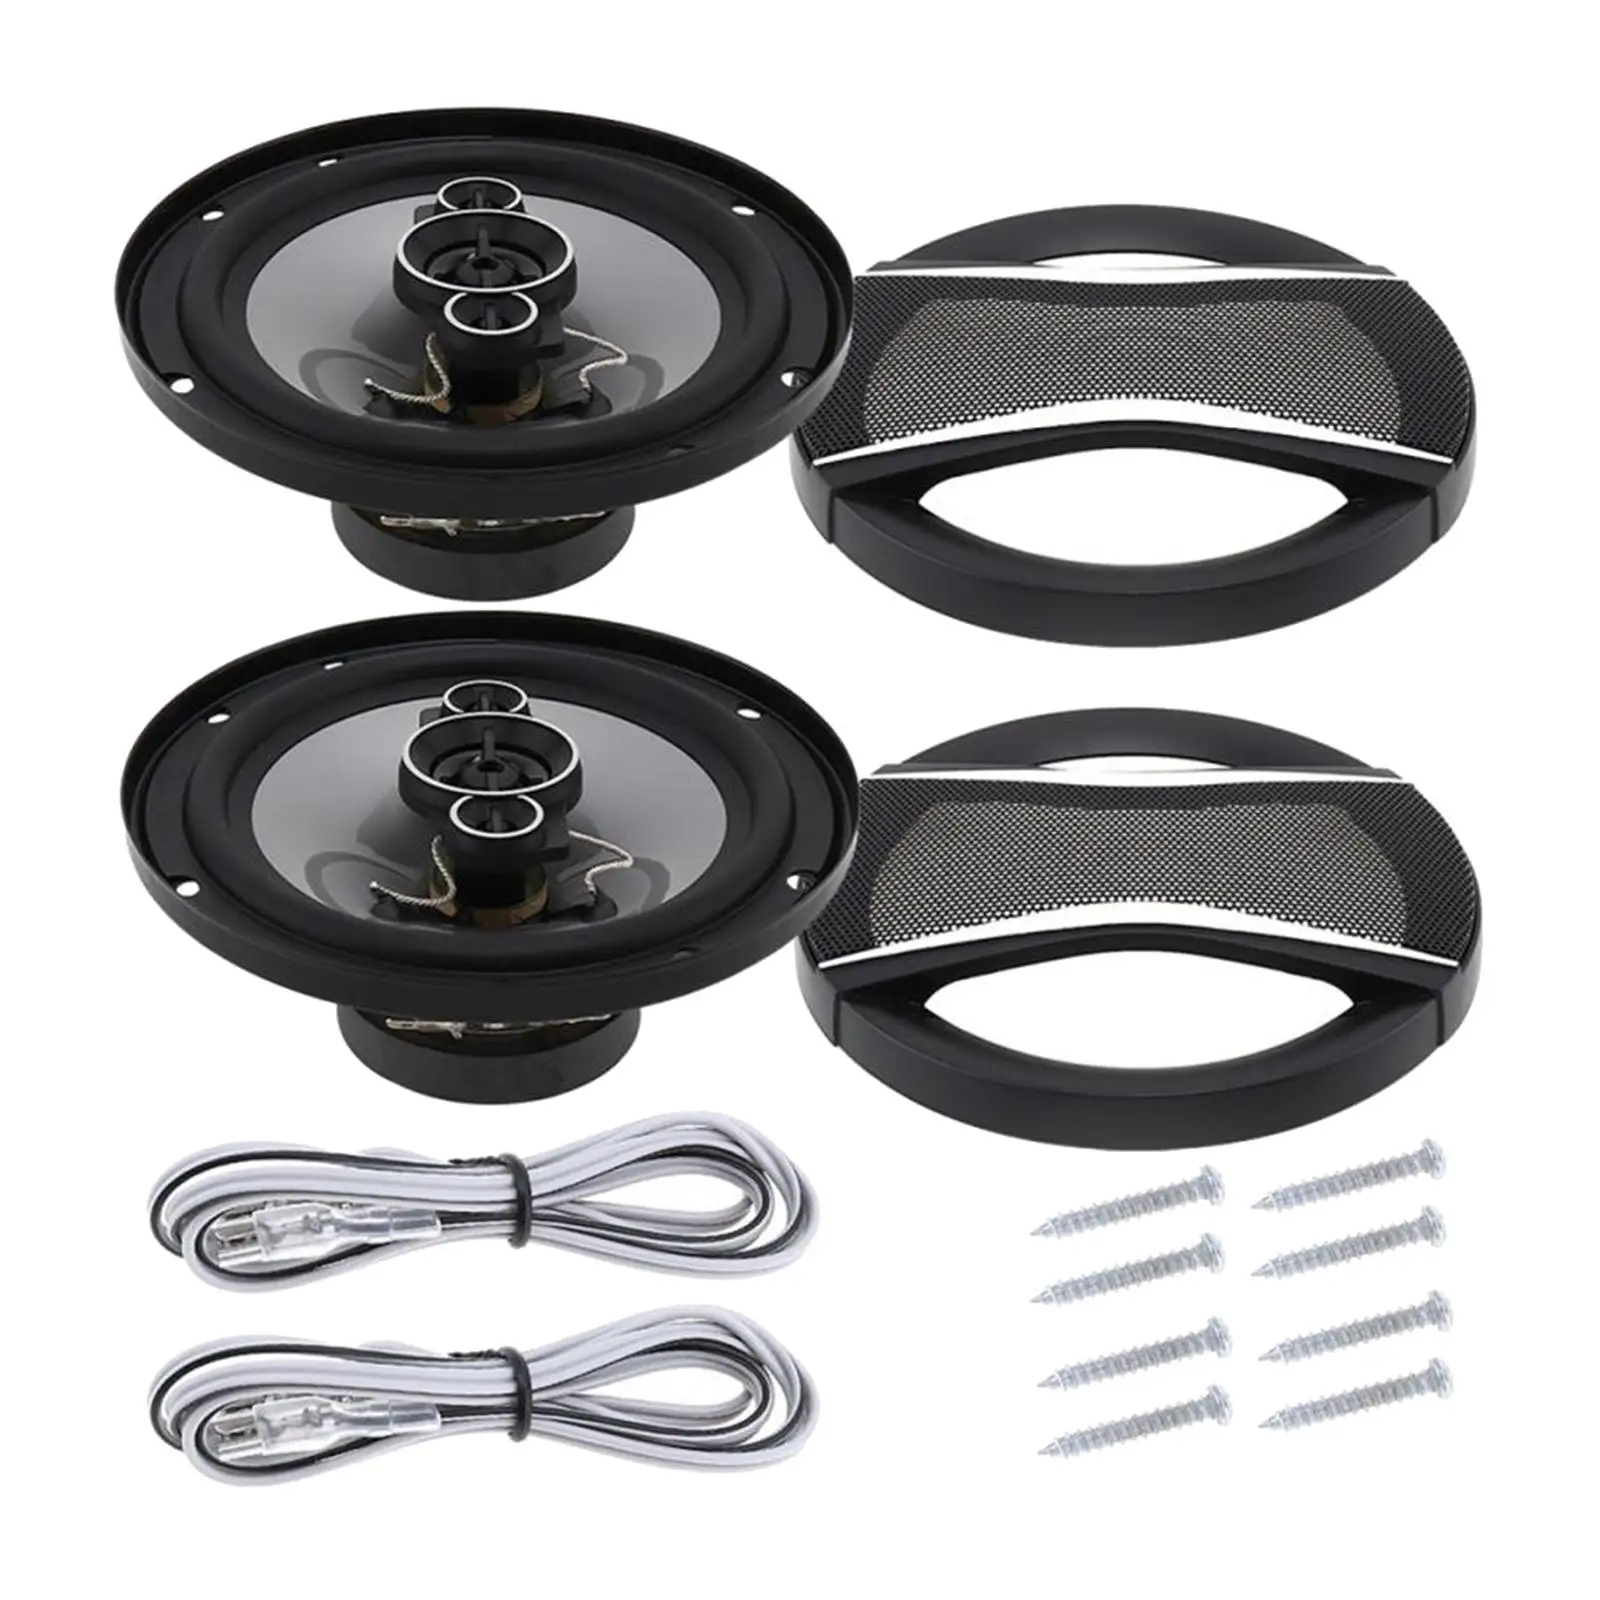 Portable Car HiFi Coaxial Speaker High Performance Loudspeaker Component Stereo